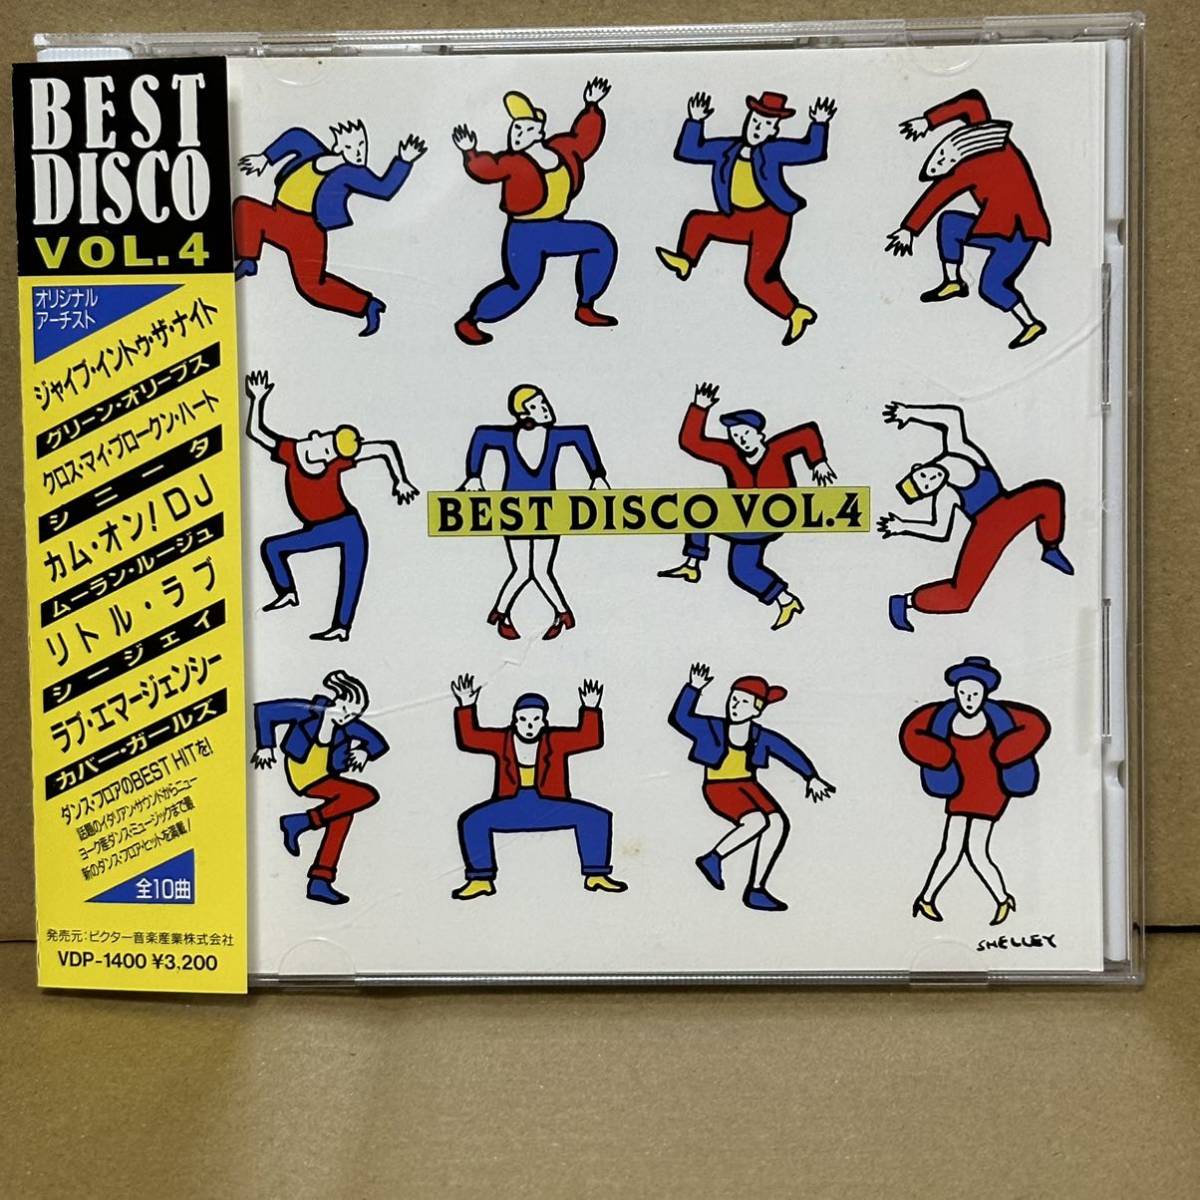 [CD] BEST DISCO VOL.4 / : GREEN OLIVES JIVE INTO THE NIGHT : MOULIN ROUGE / D.J. WANNA BE YOUR RECORD : CEEJAY / A LITTLE LOVE